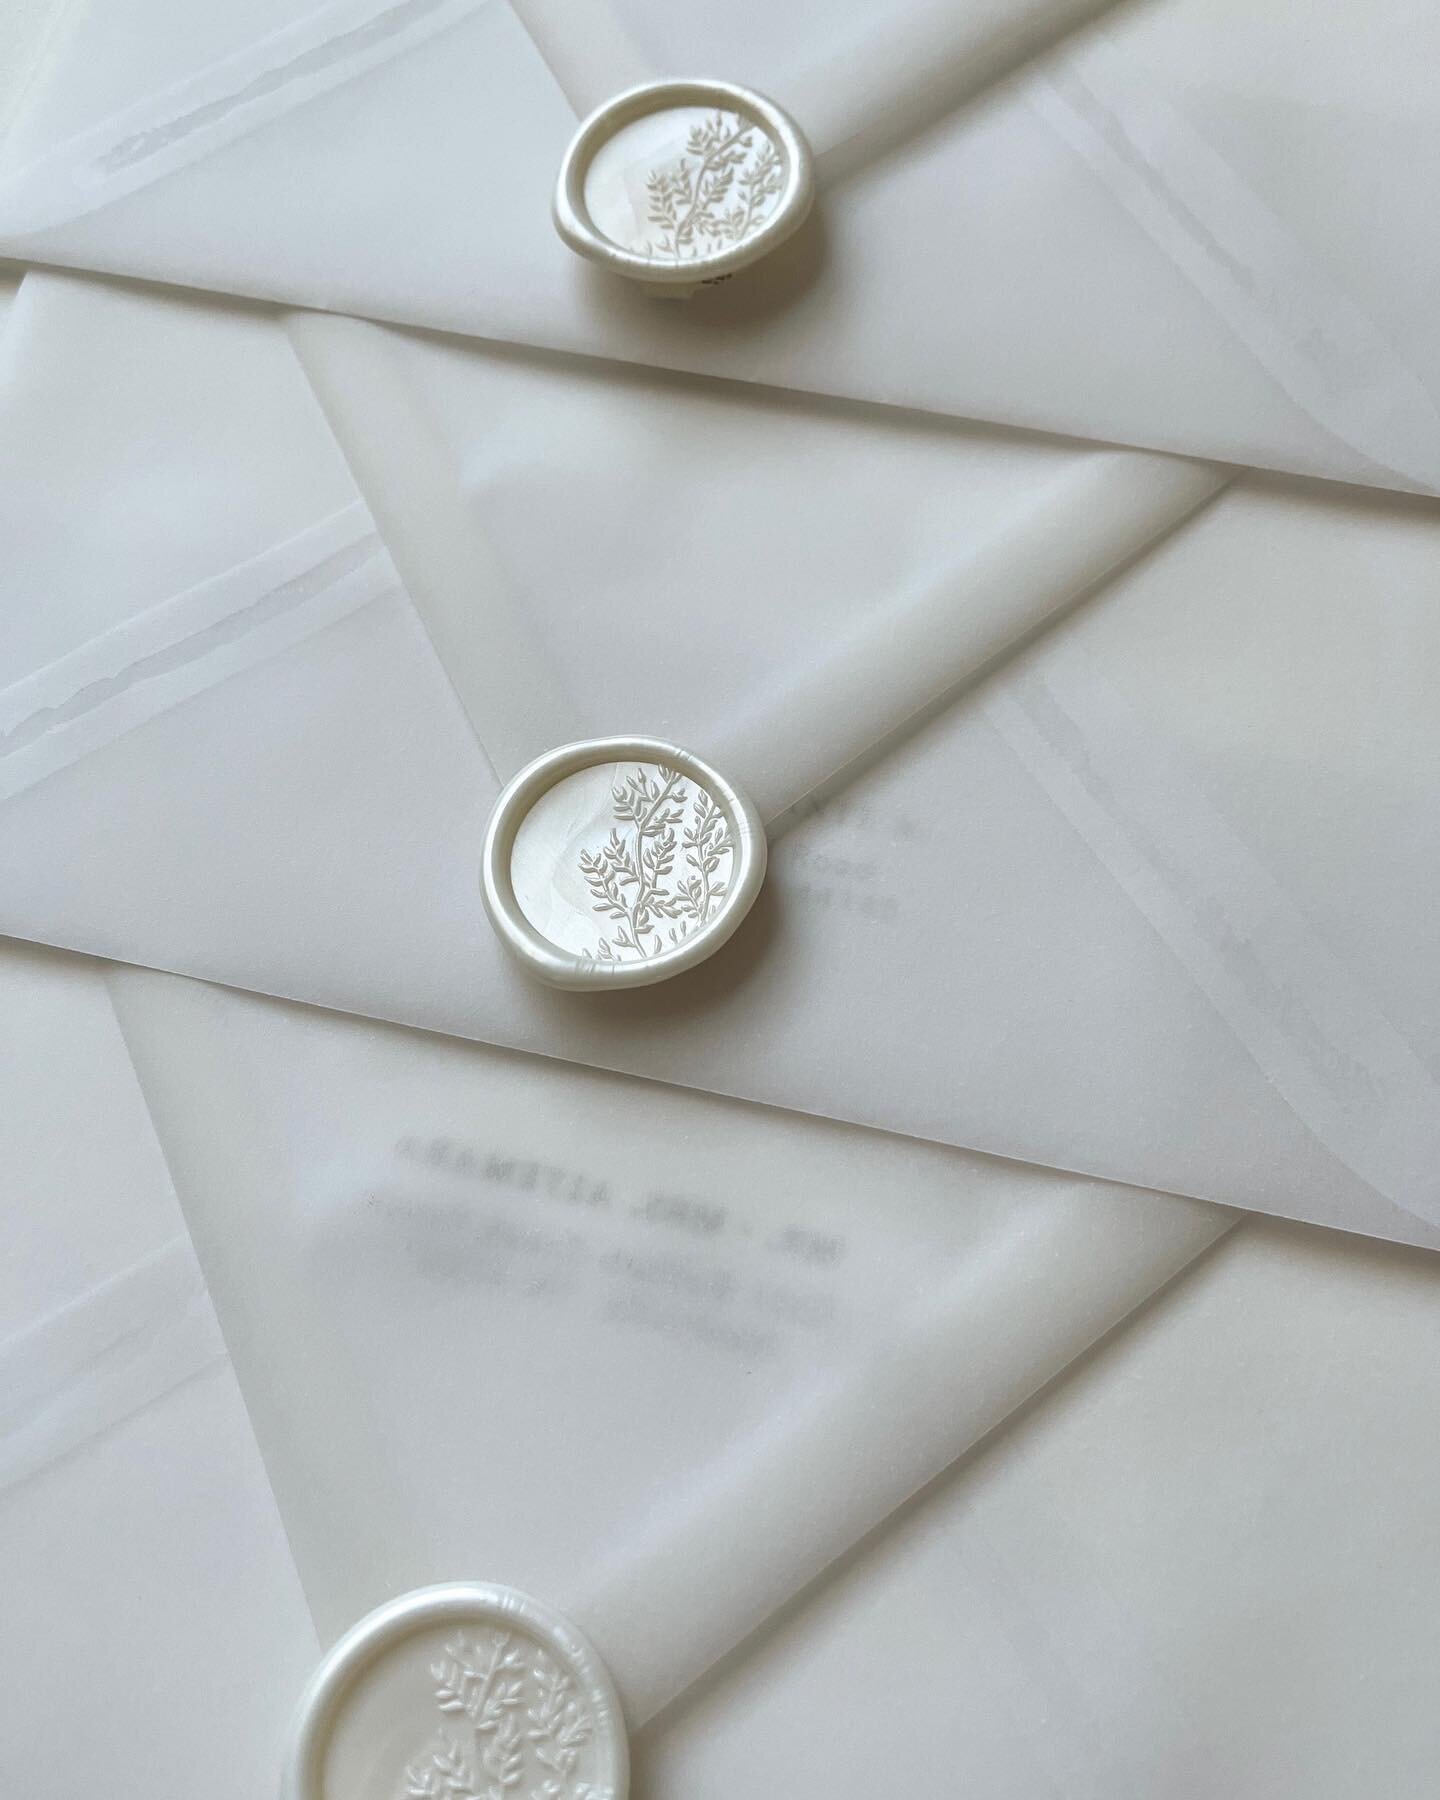 Spring is in the air and nothing other than these gorgeous branch wax seals set the mood perfectly! 
.
.
.
.
.
#letterpressinvitations ​​​​​​​​​​​​​​​​
#luxuryweddingstationery ​​​​​​​​​​​​​​​​
#destinationweddings ​​​​​​​​​​​​​​​​
#invitationsuite ​